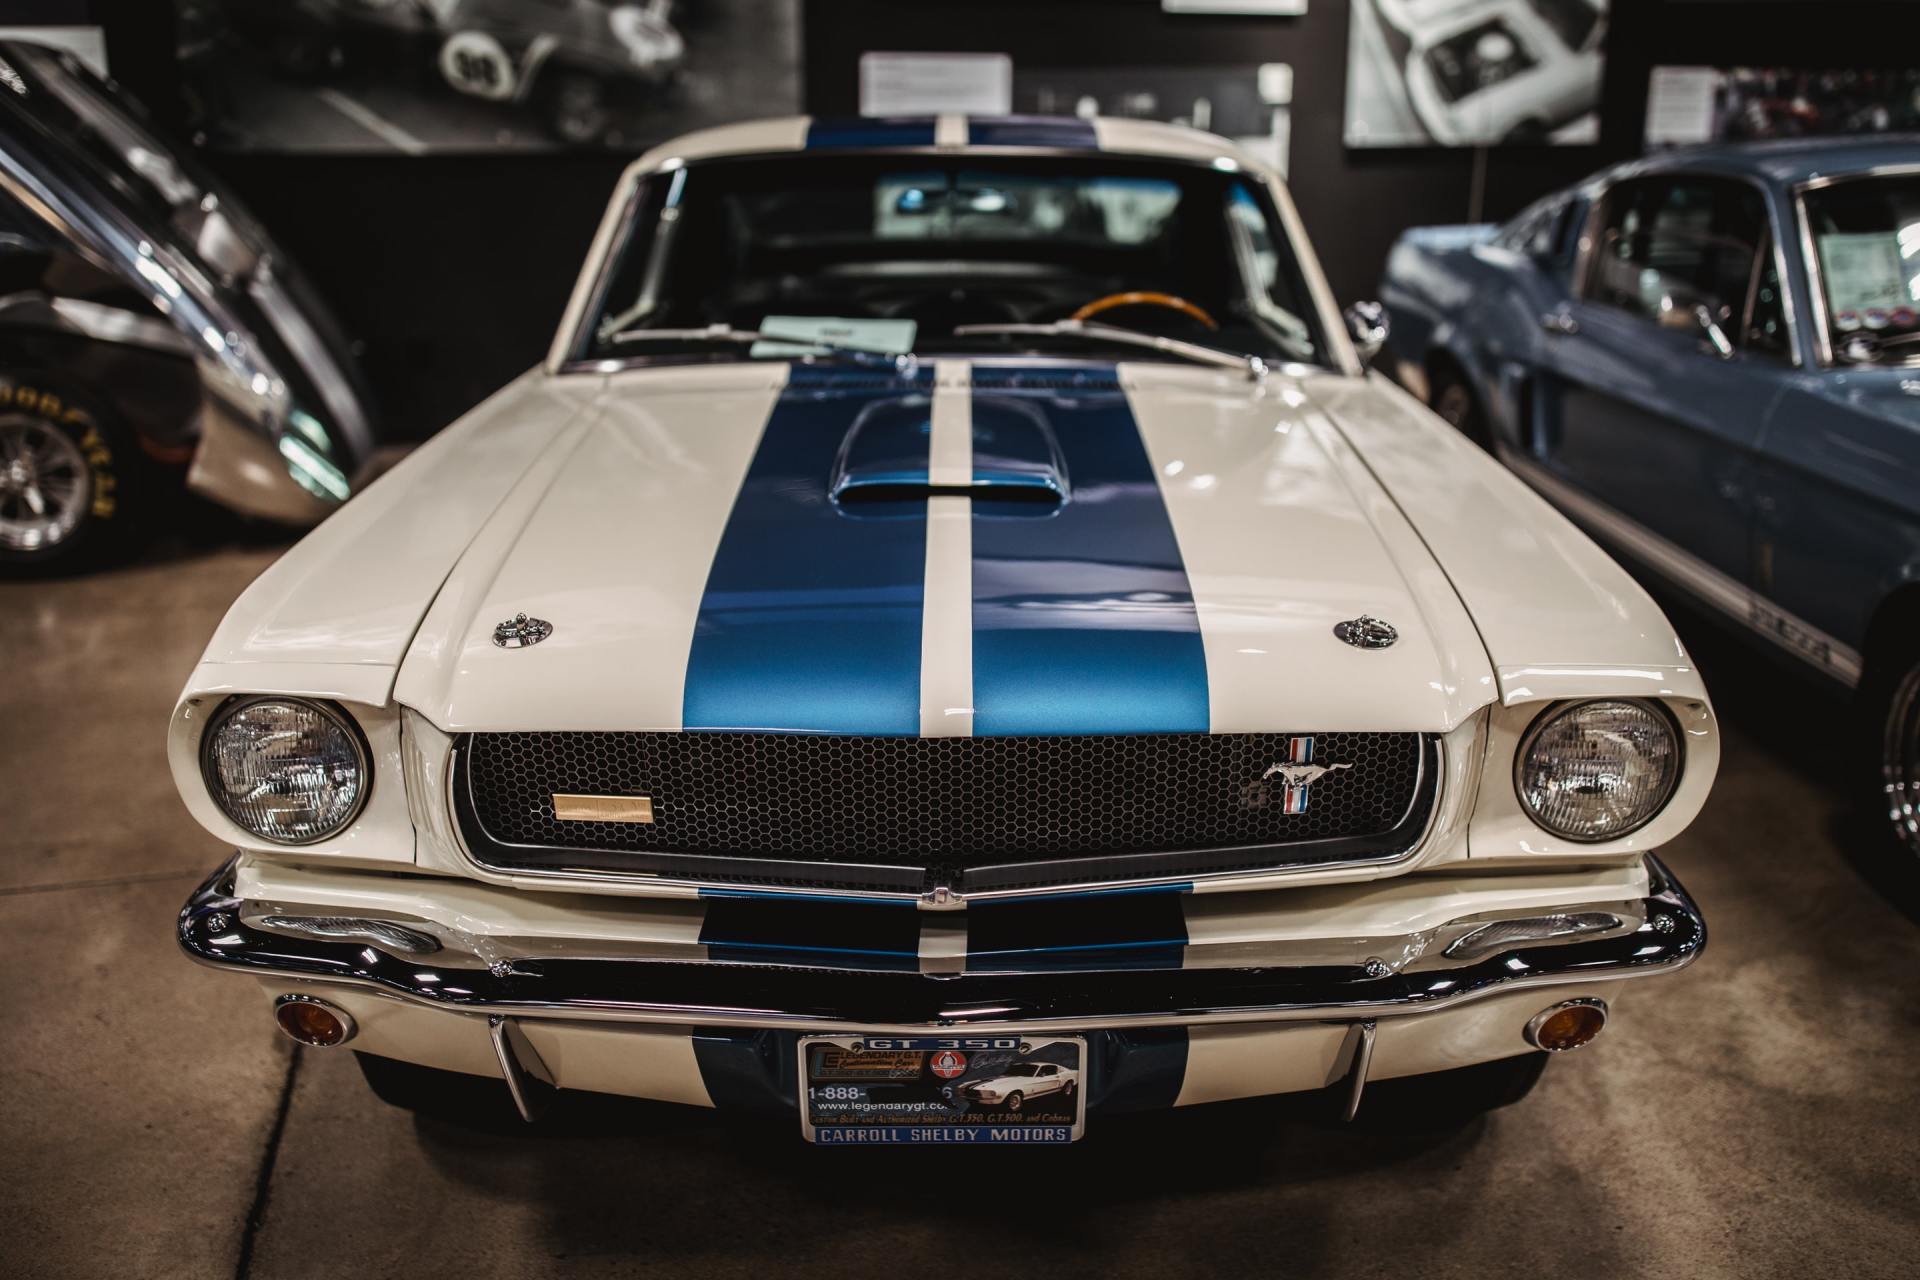 A white mustang with blue stripes is parked in a garage.